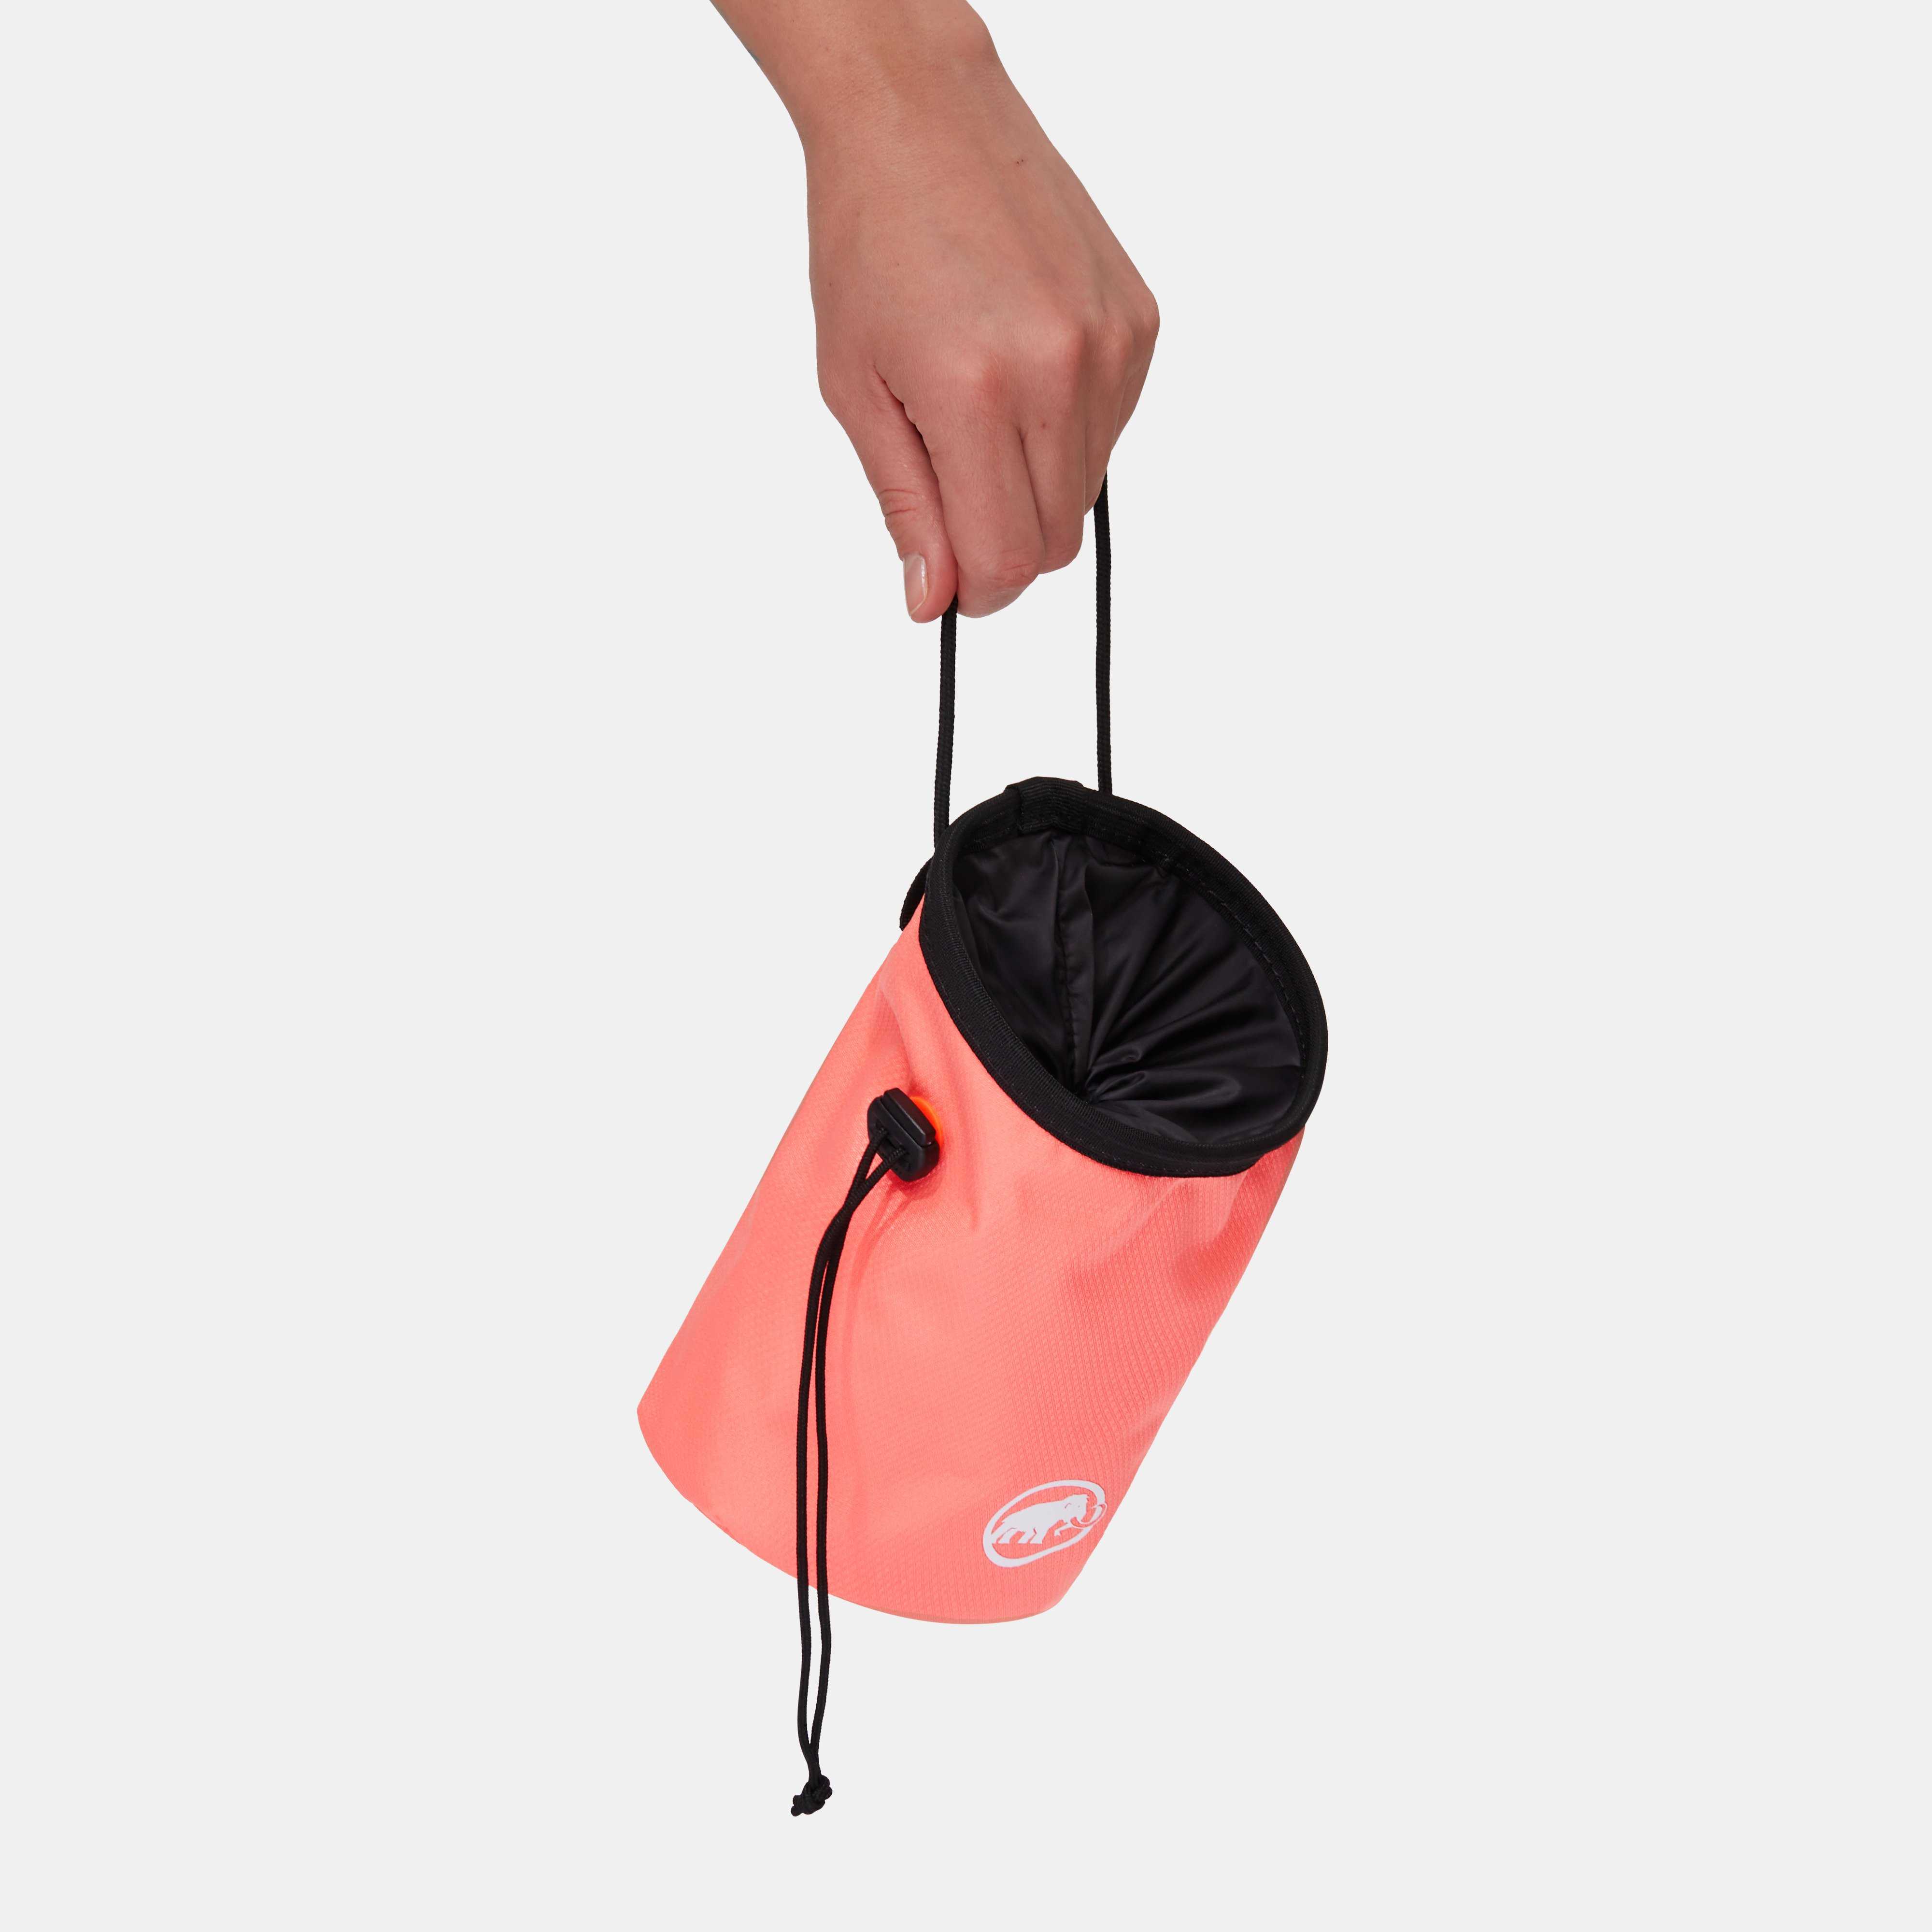 Mammut Classic with A Simple Design Gym Basic Chalk Bag unisex One Size